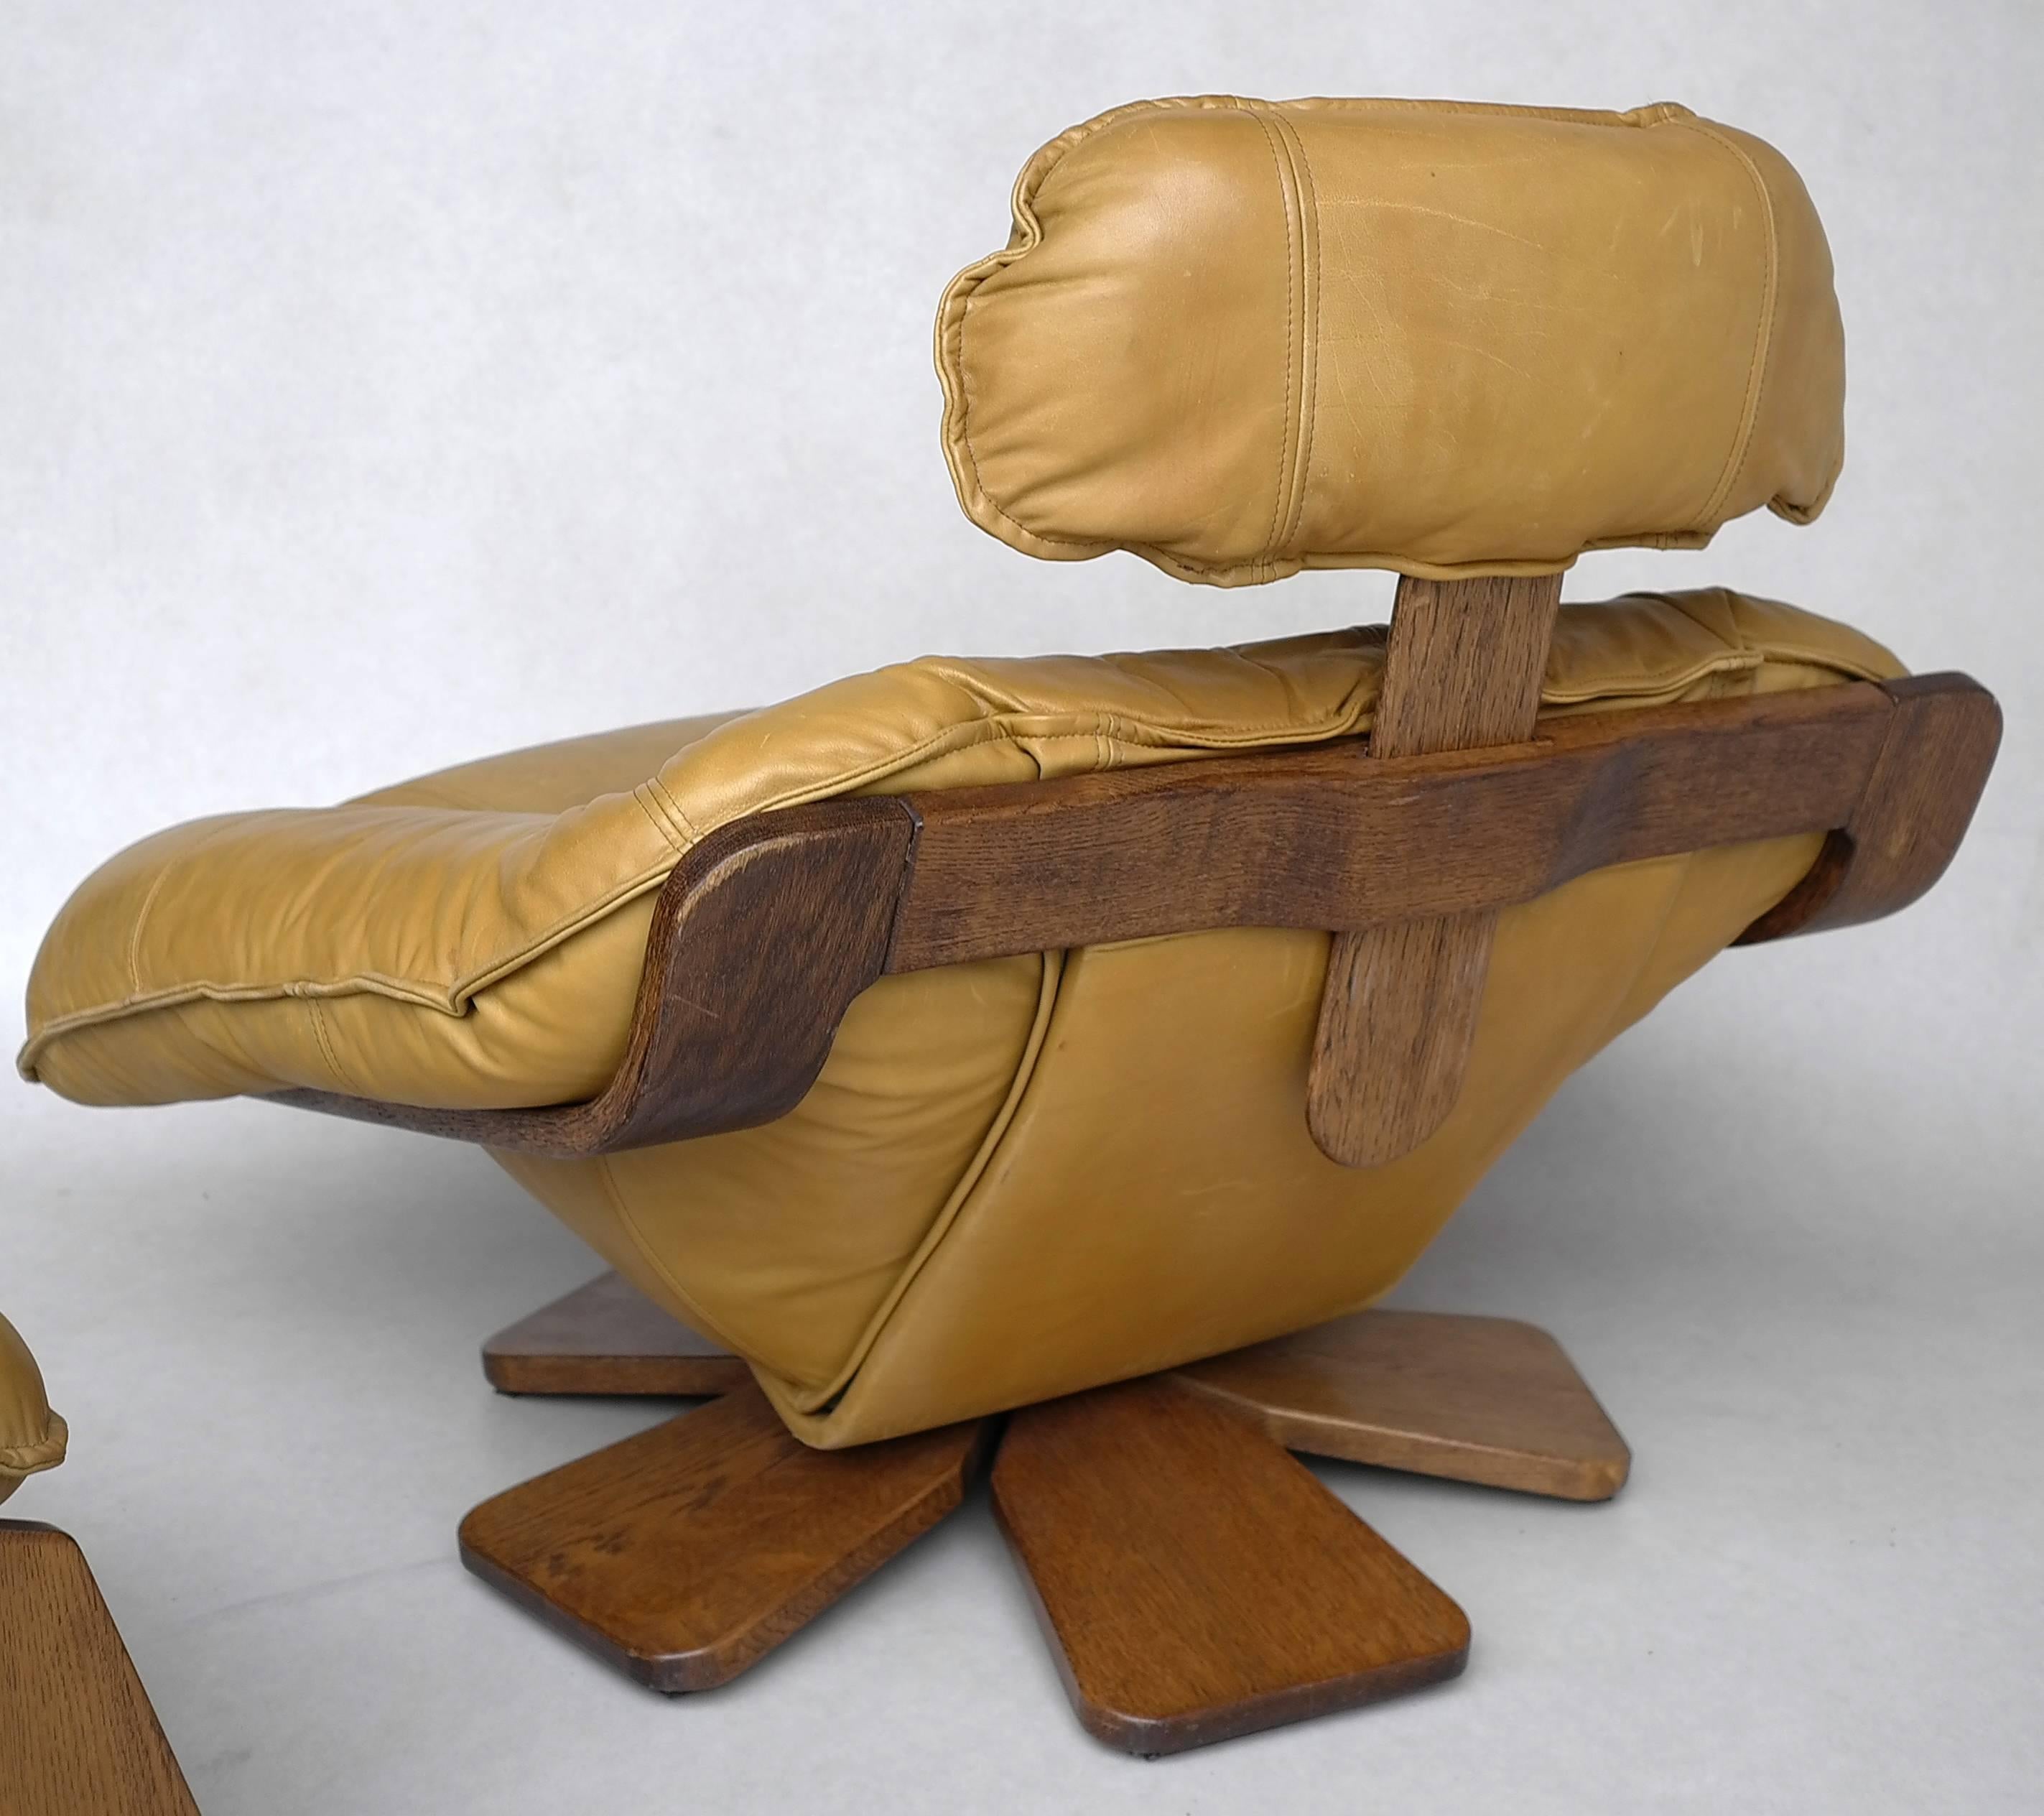 Wood Cognac Leather Lounge Chair with Ottoman, Brazil, 1960s